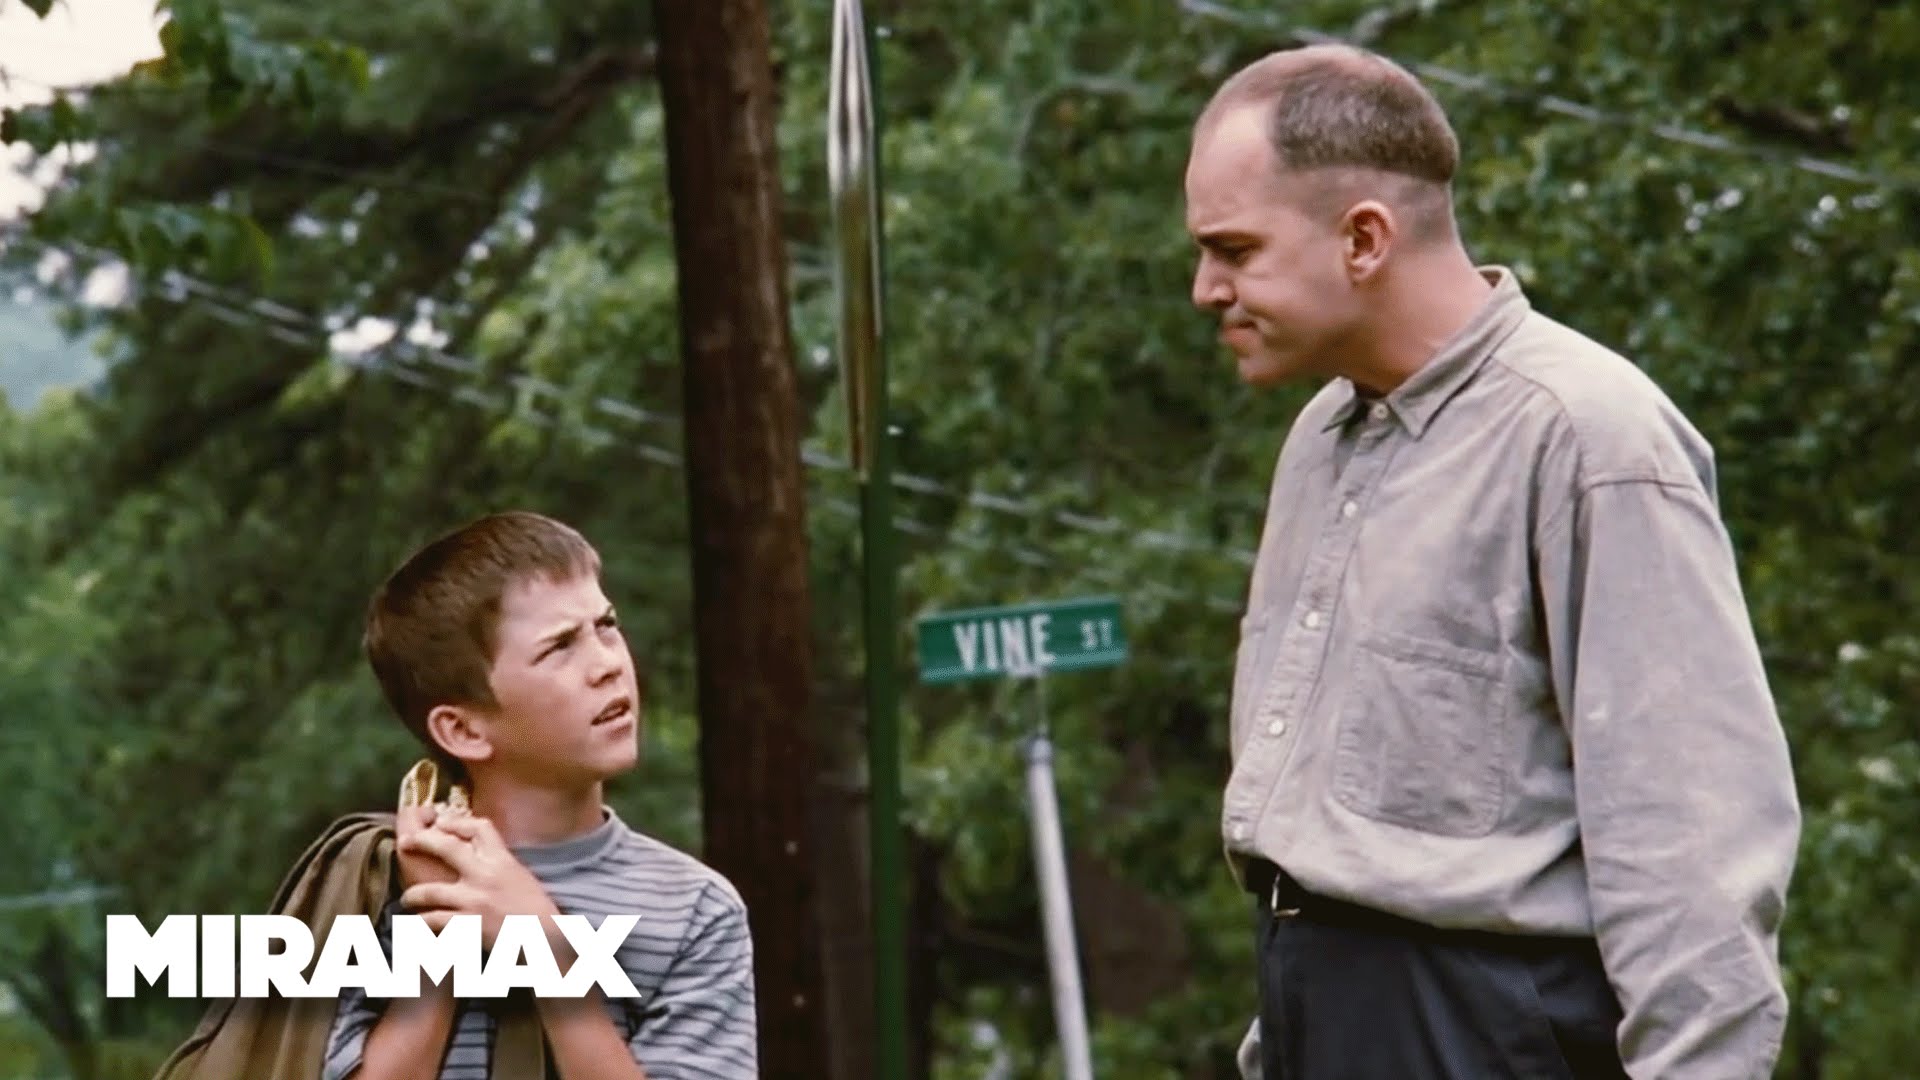 Sling Blade wallpapers, Movie, HQ Sling Blade pictures 4K Wallpapers 2019